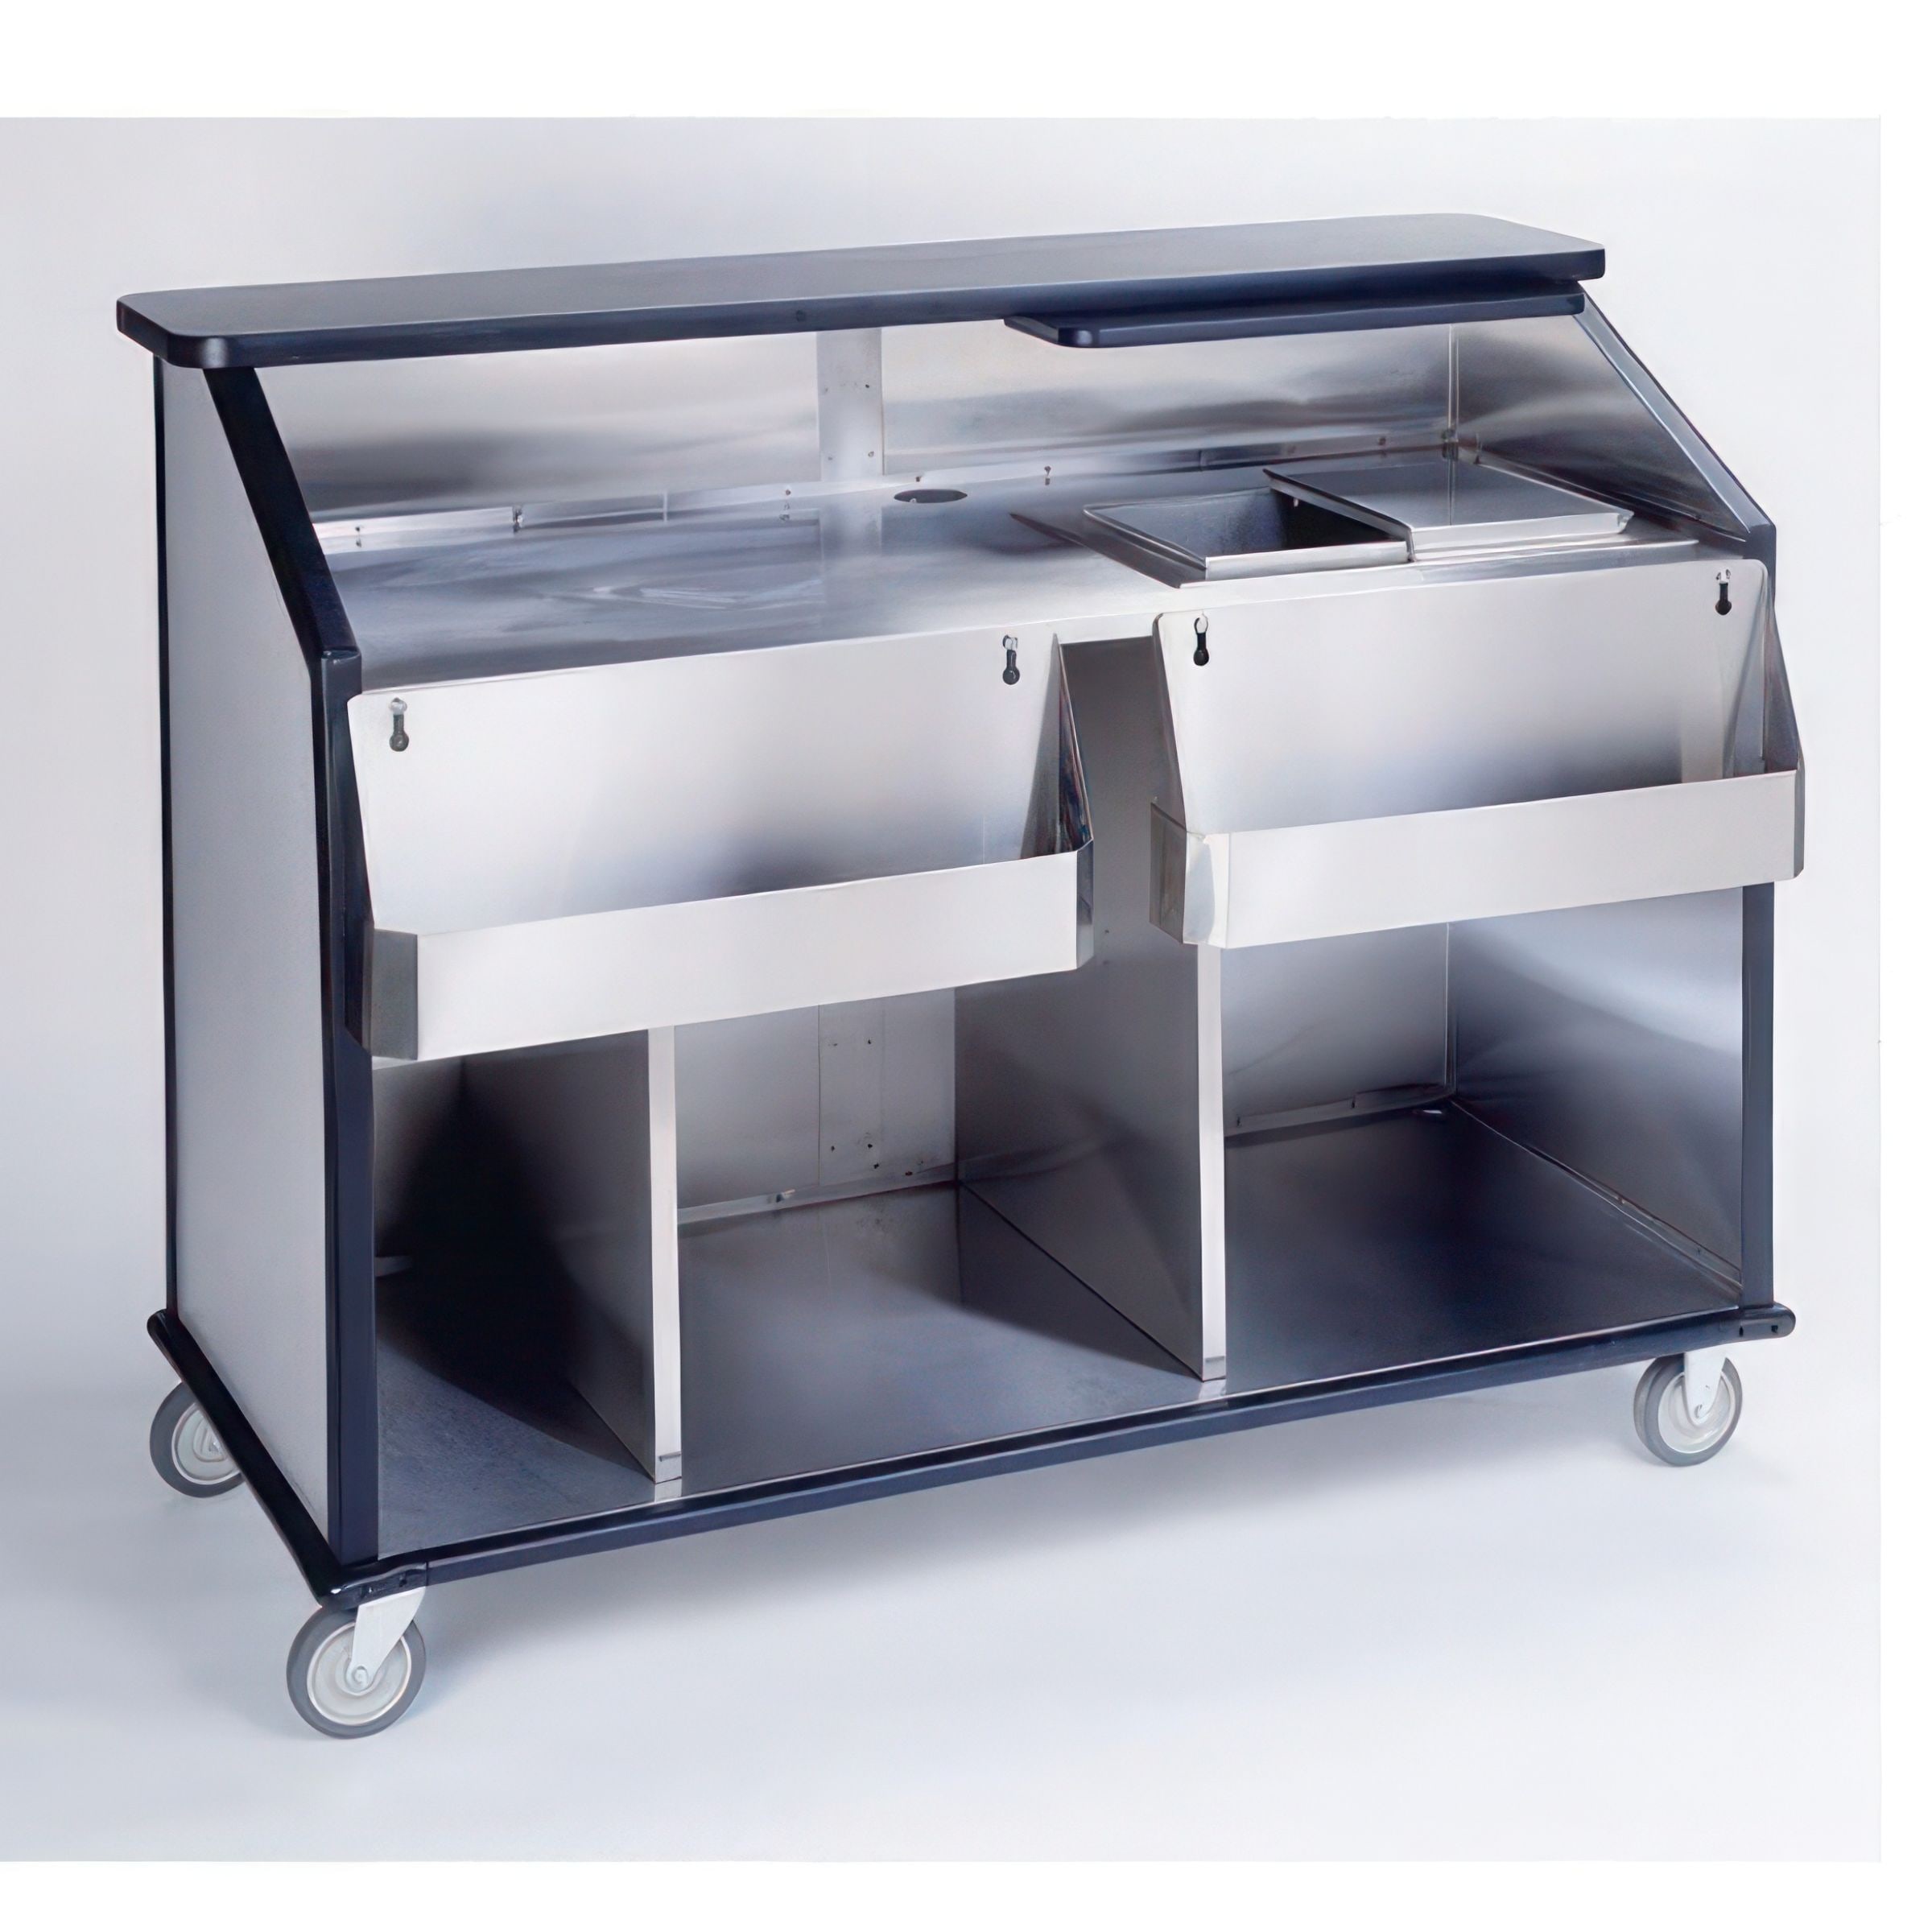 Professional mobile bars and bar stations 90 cm